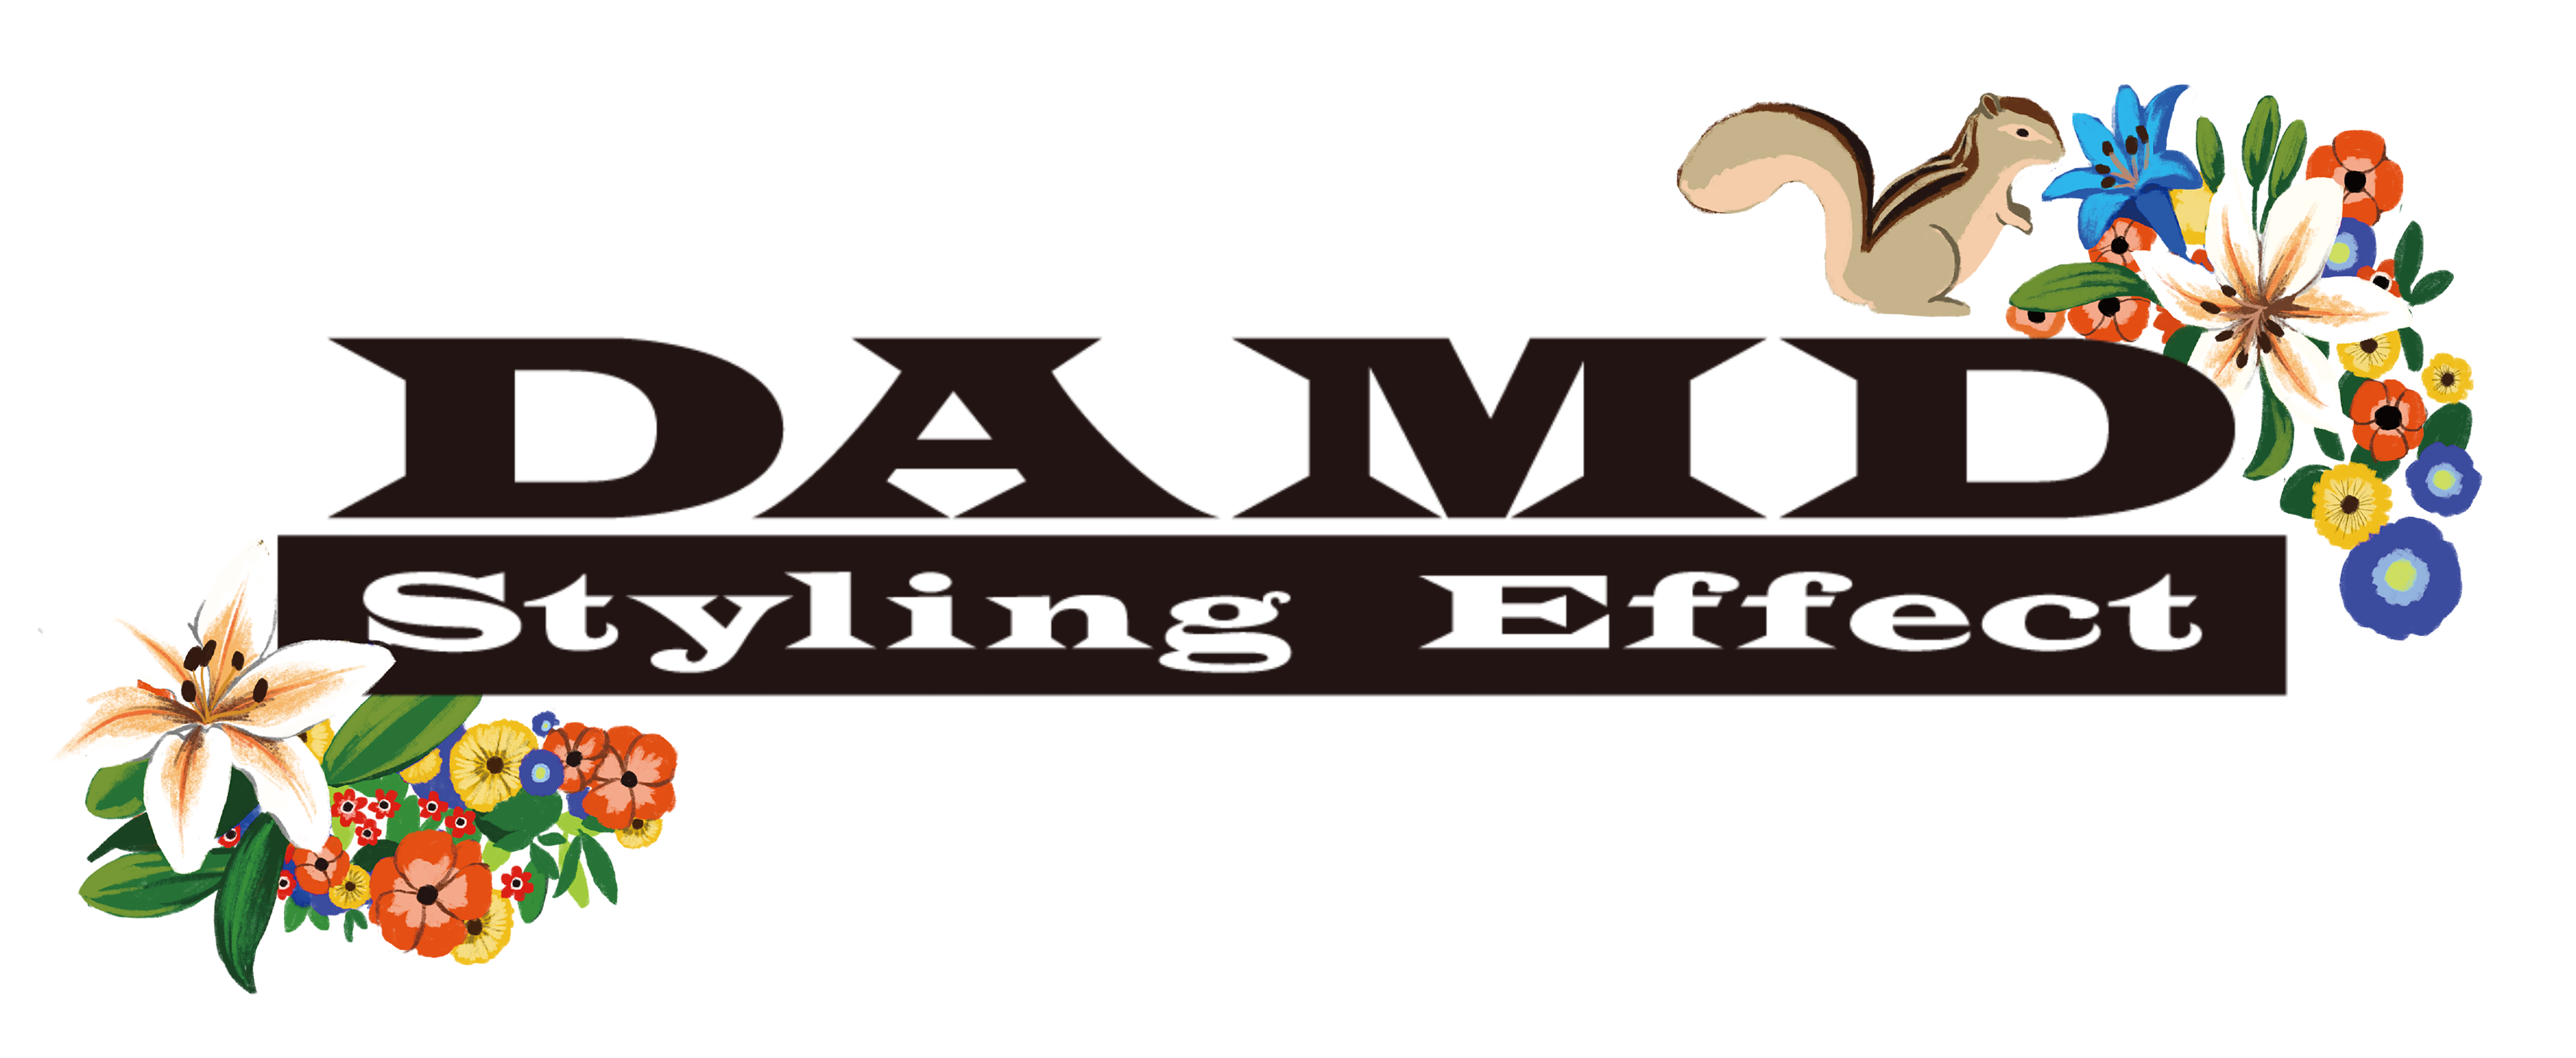 DAMD LIMITED STORE